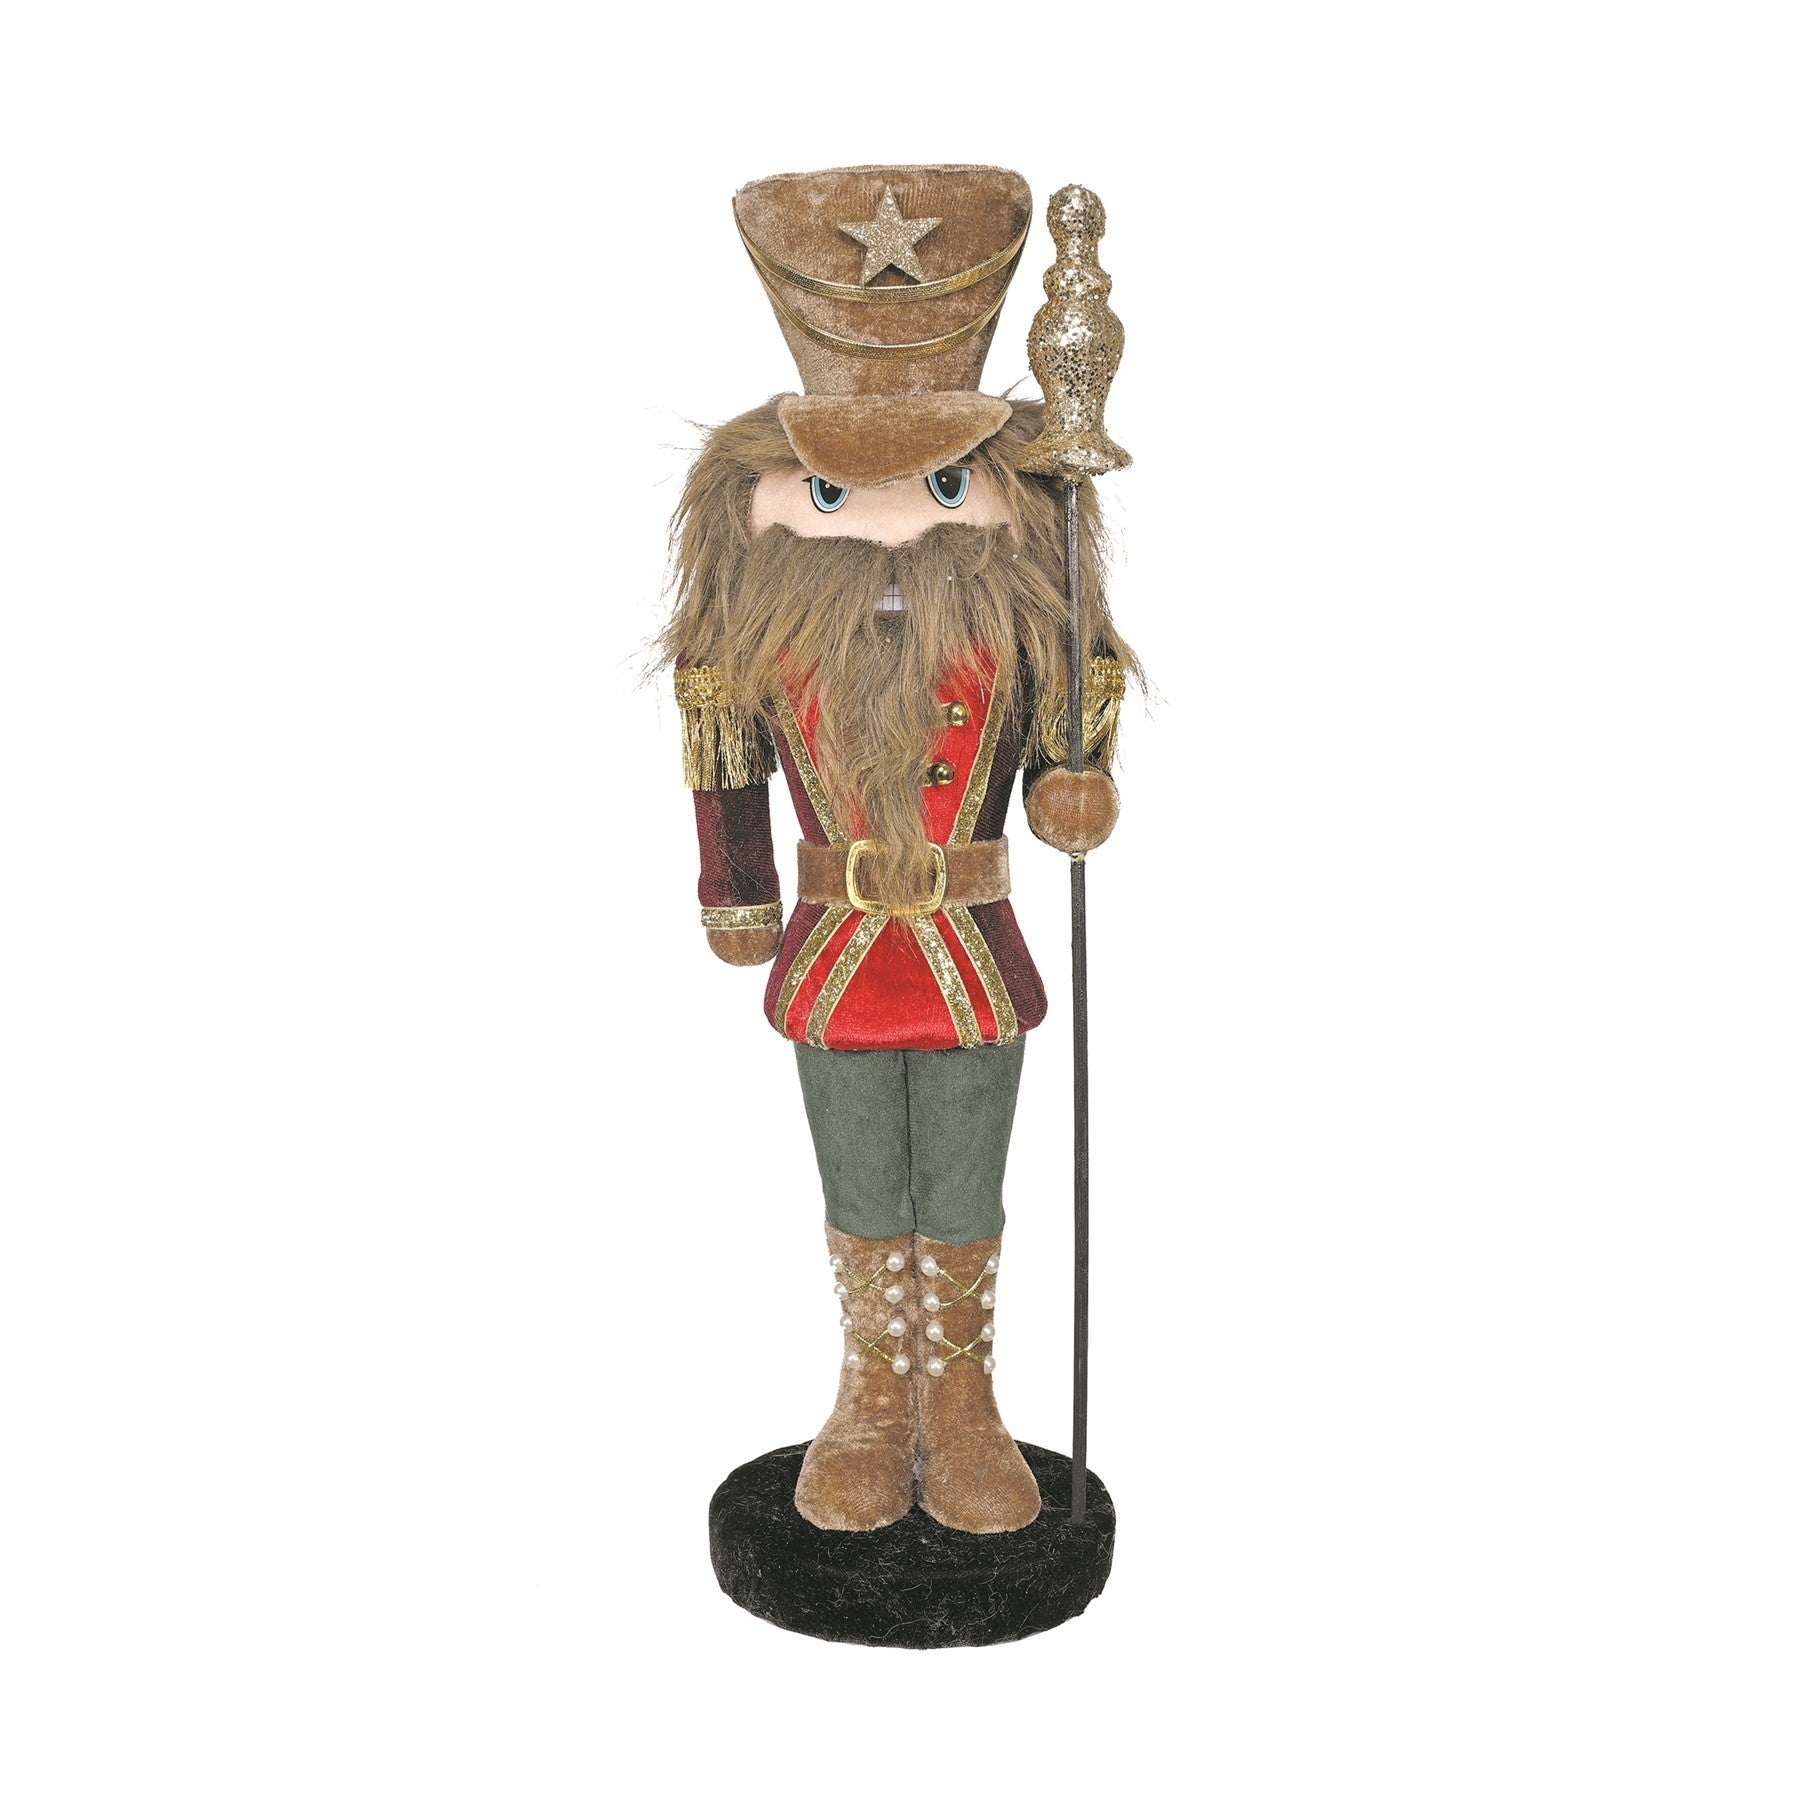 View Red and Green Nutcracker 42cm information